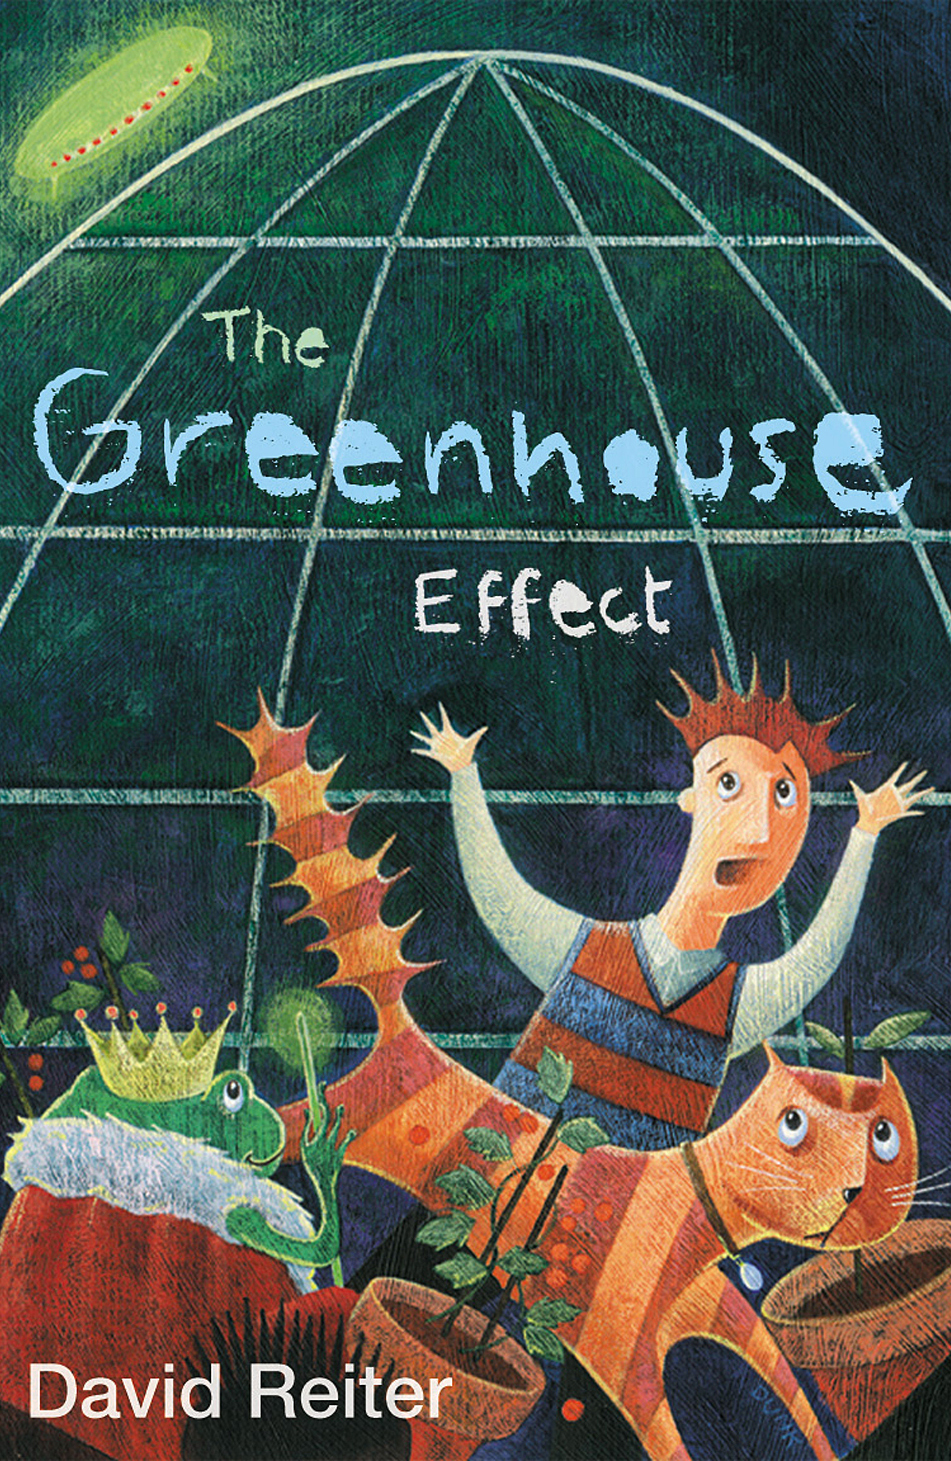  THE GREENHOUSE EFFECT by David Reiter  Lothian Books, Hachette Livre  Acrylics on board 